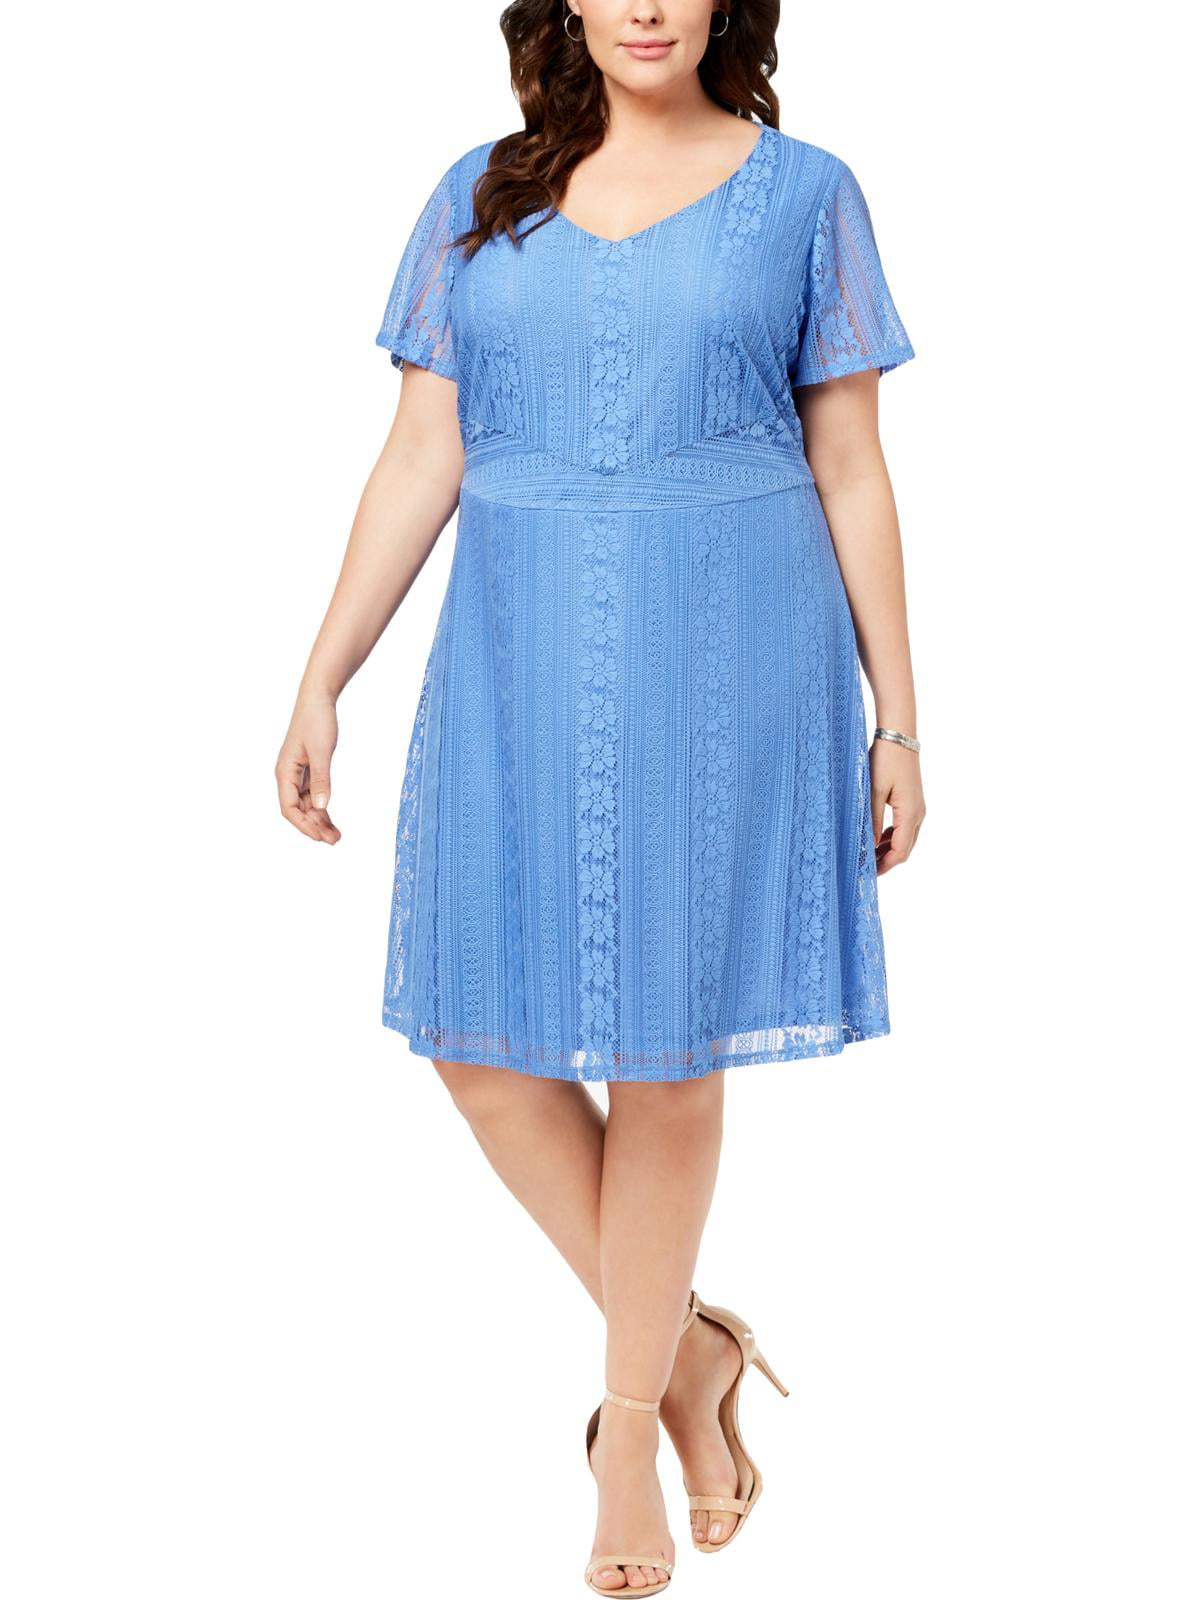 NY Collection Womens Plus Lace Fit & Flare Sundress Blue 1X - Walmart.com